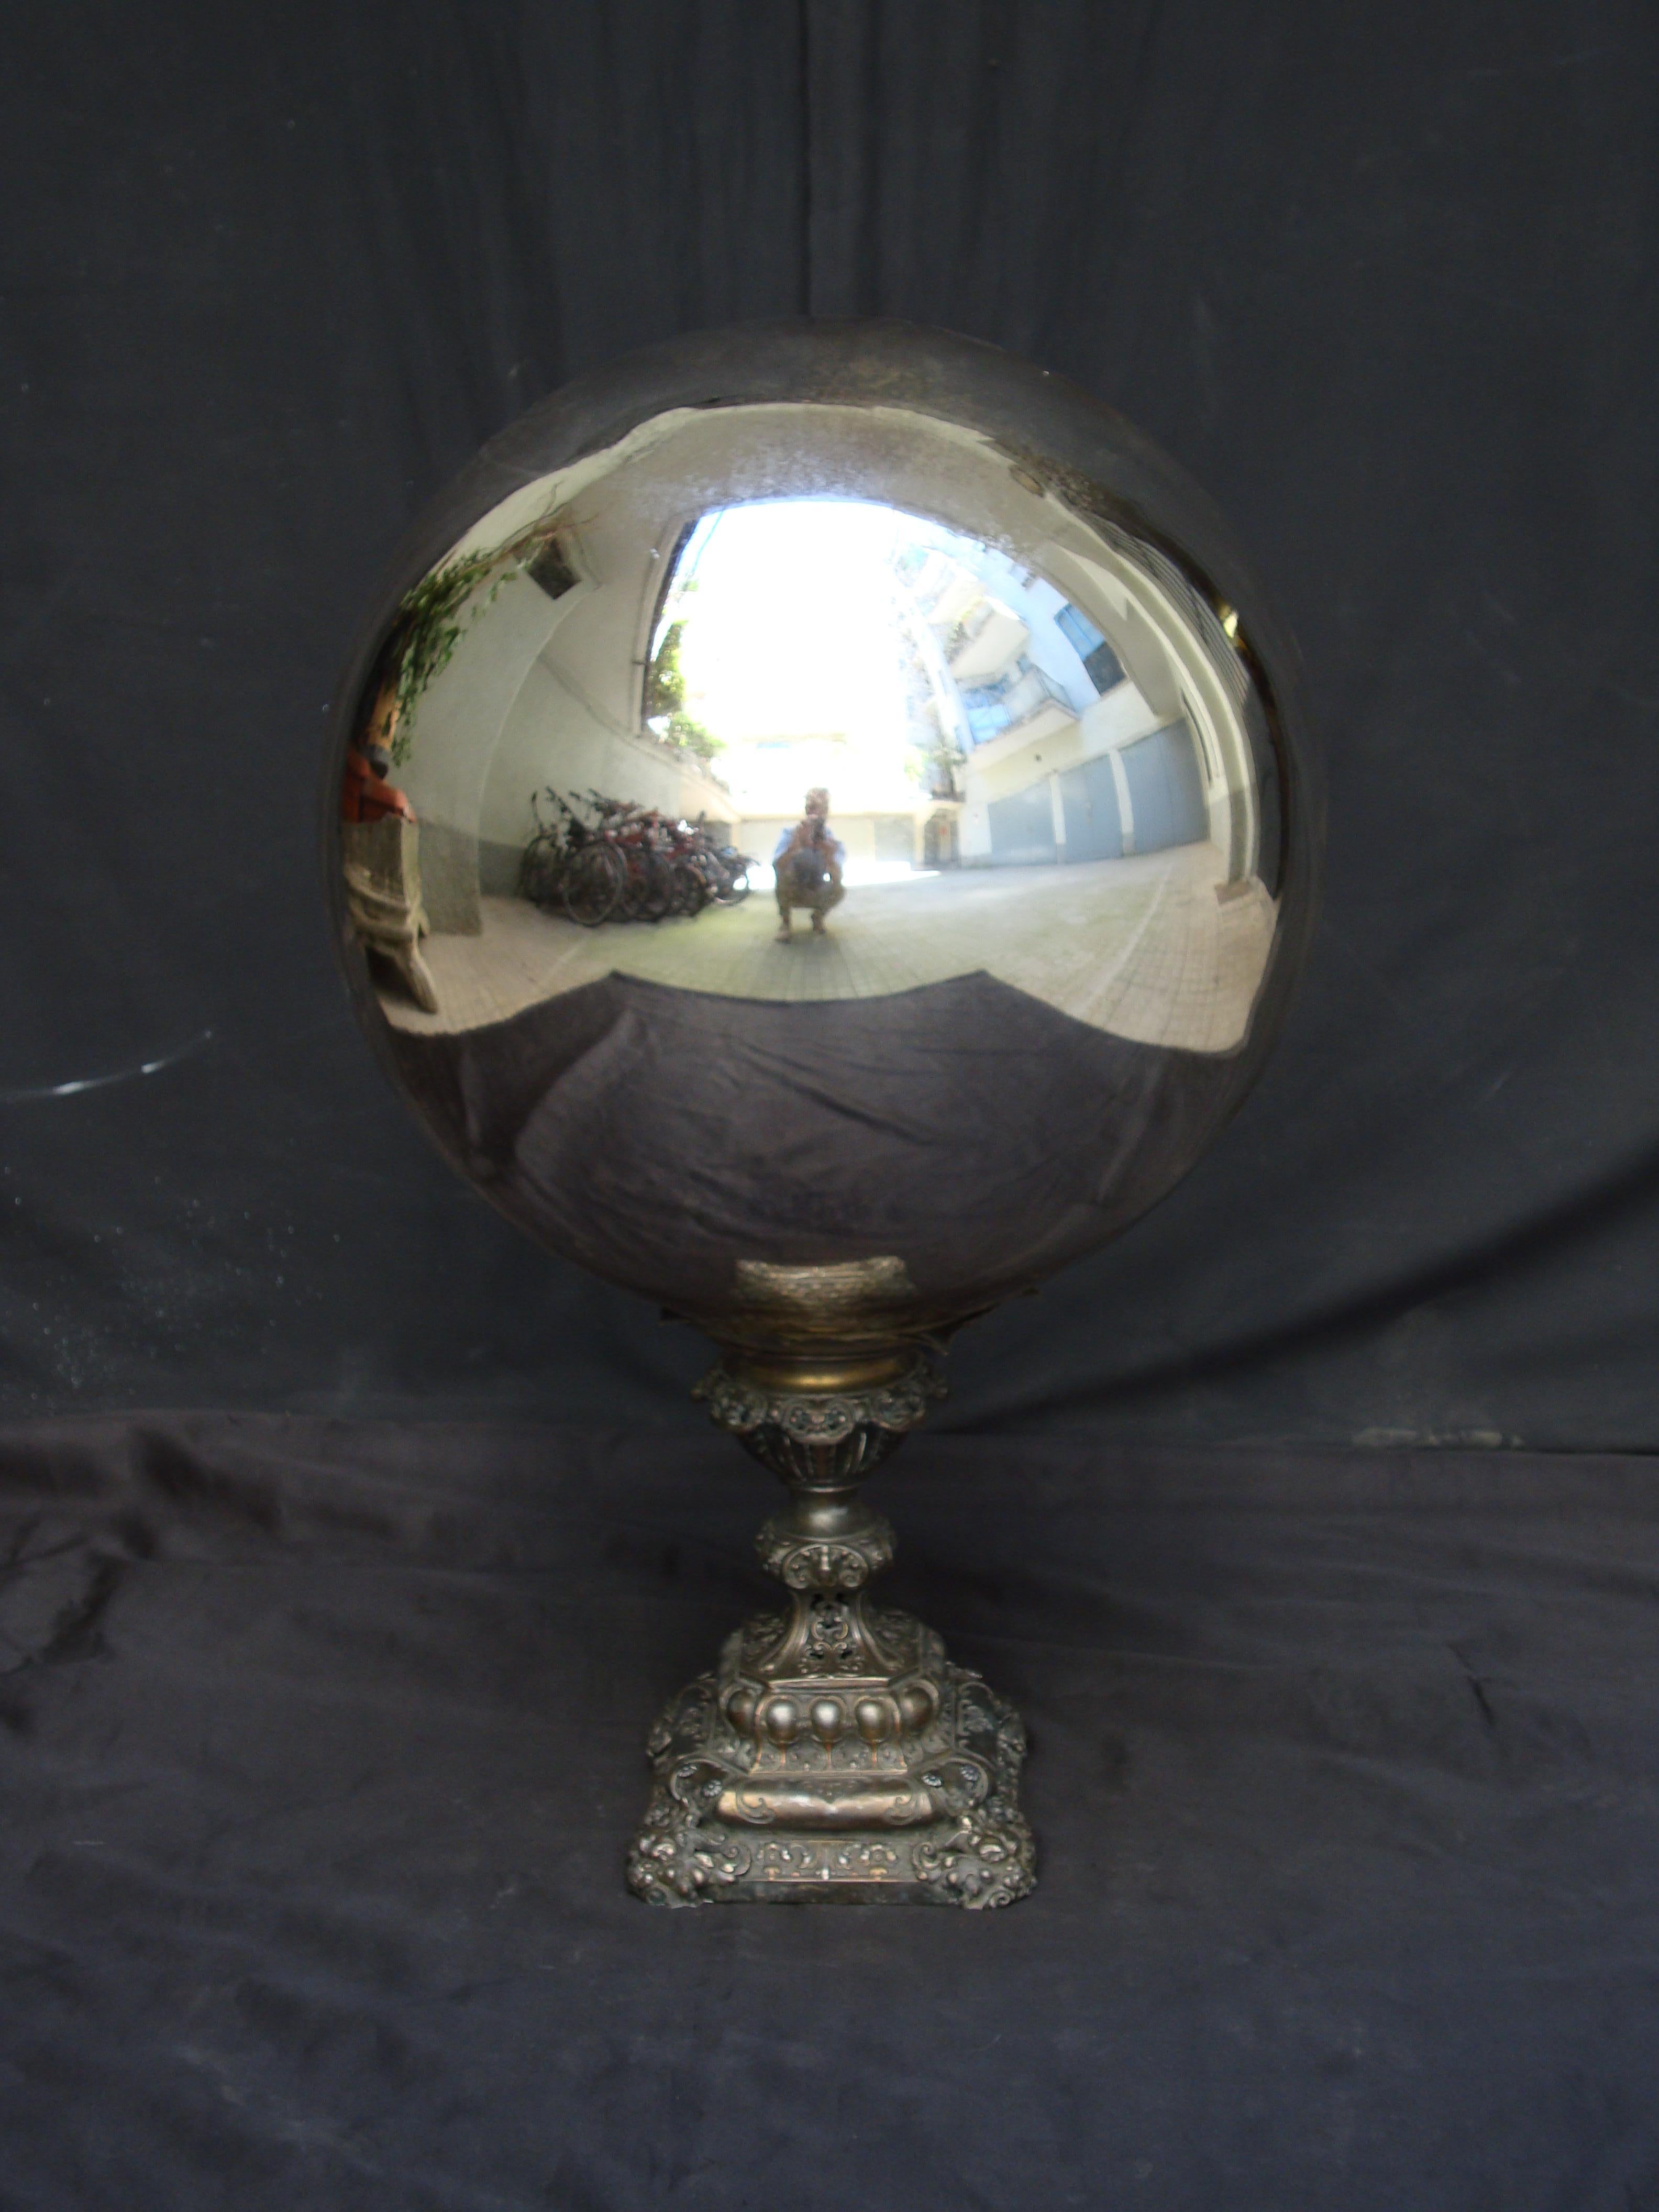 A mid-19th century large mercury glass witch ball, on a metal base with anthropomorphic details.